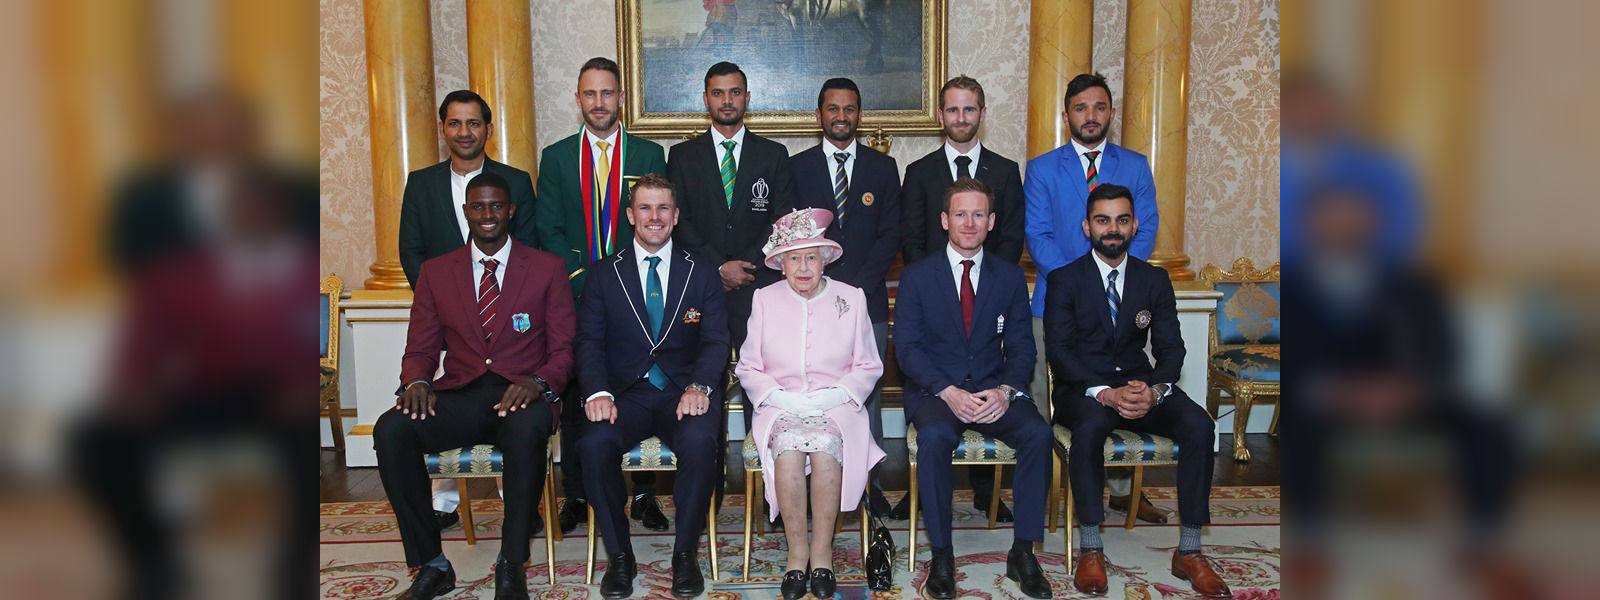 World Cup captains get royal hospitality on eve of tournament